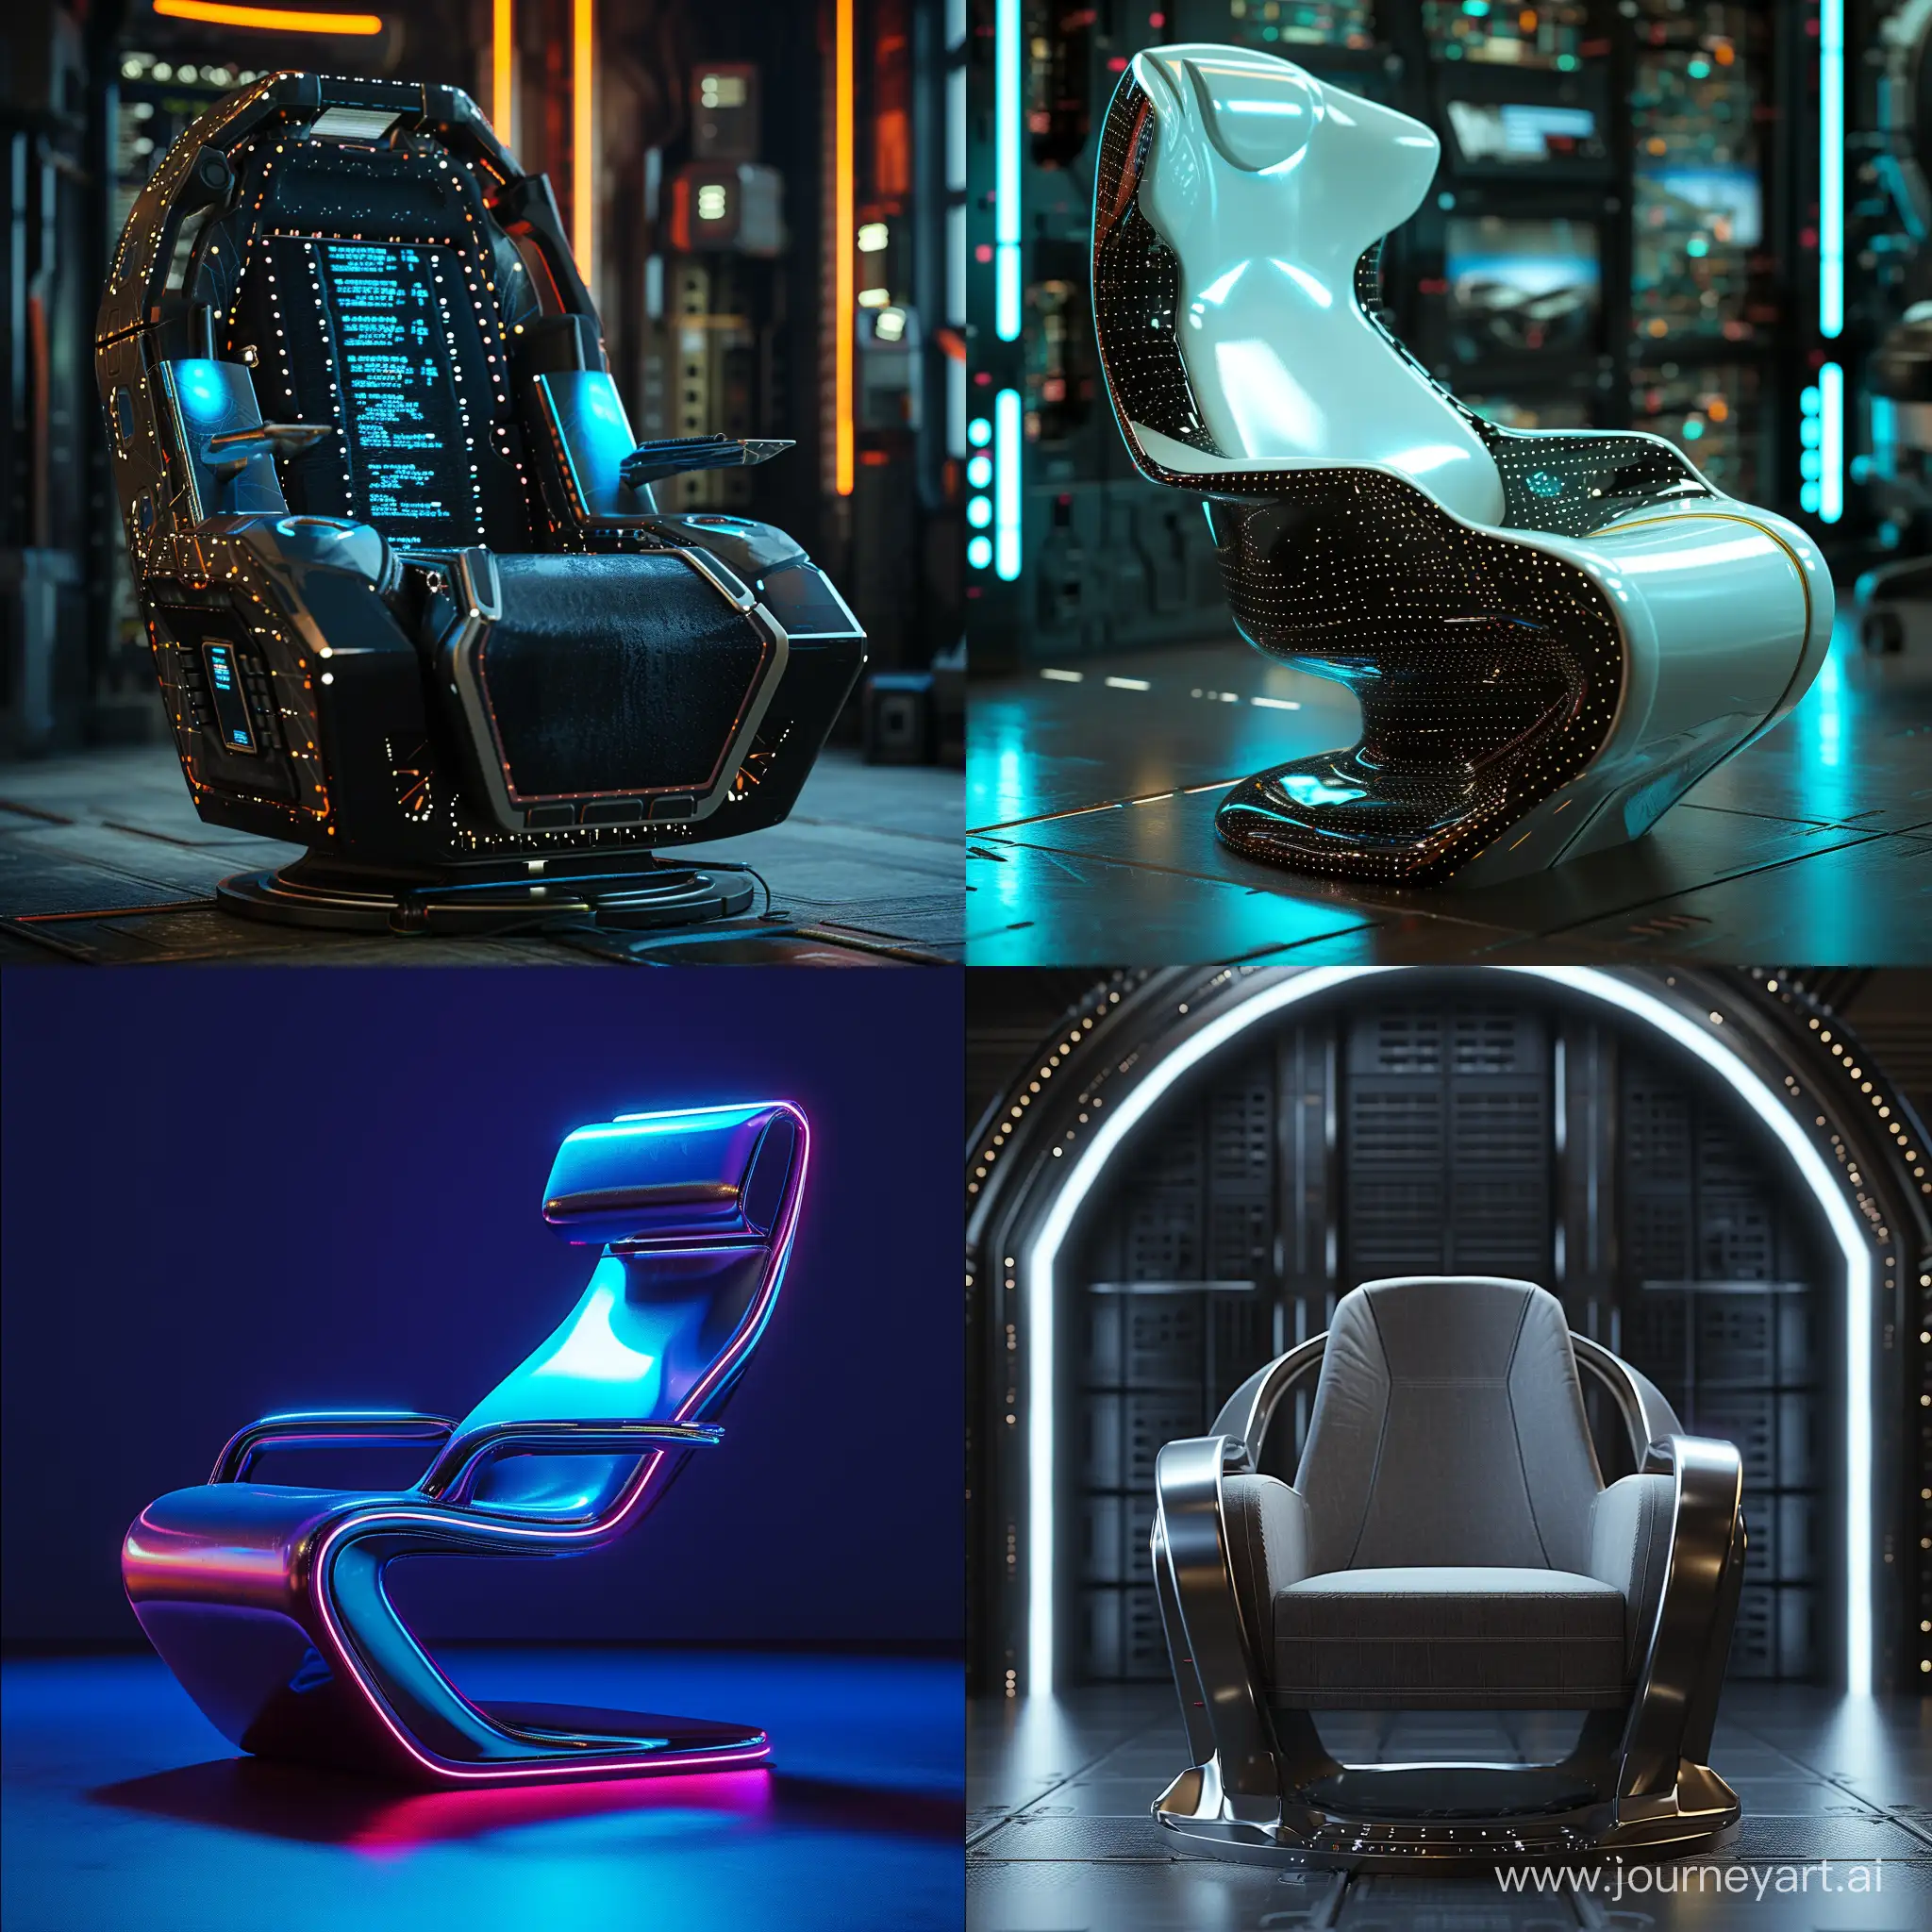 Futuristic-Cybernetic-Style-Chair-Cinematic-Elegance-and-Innovation